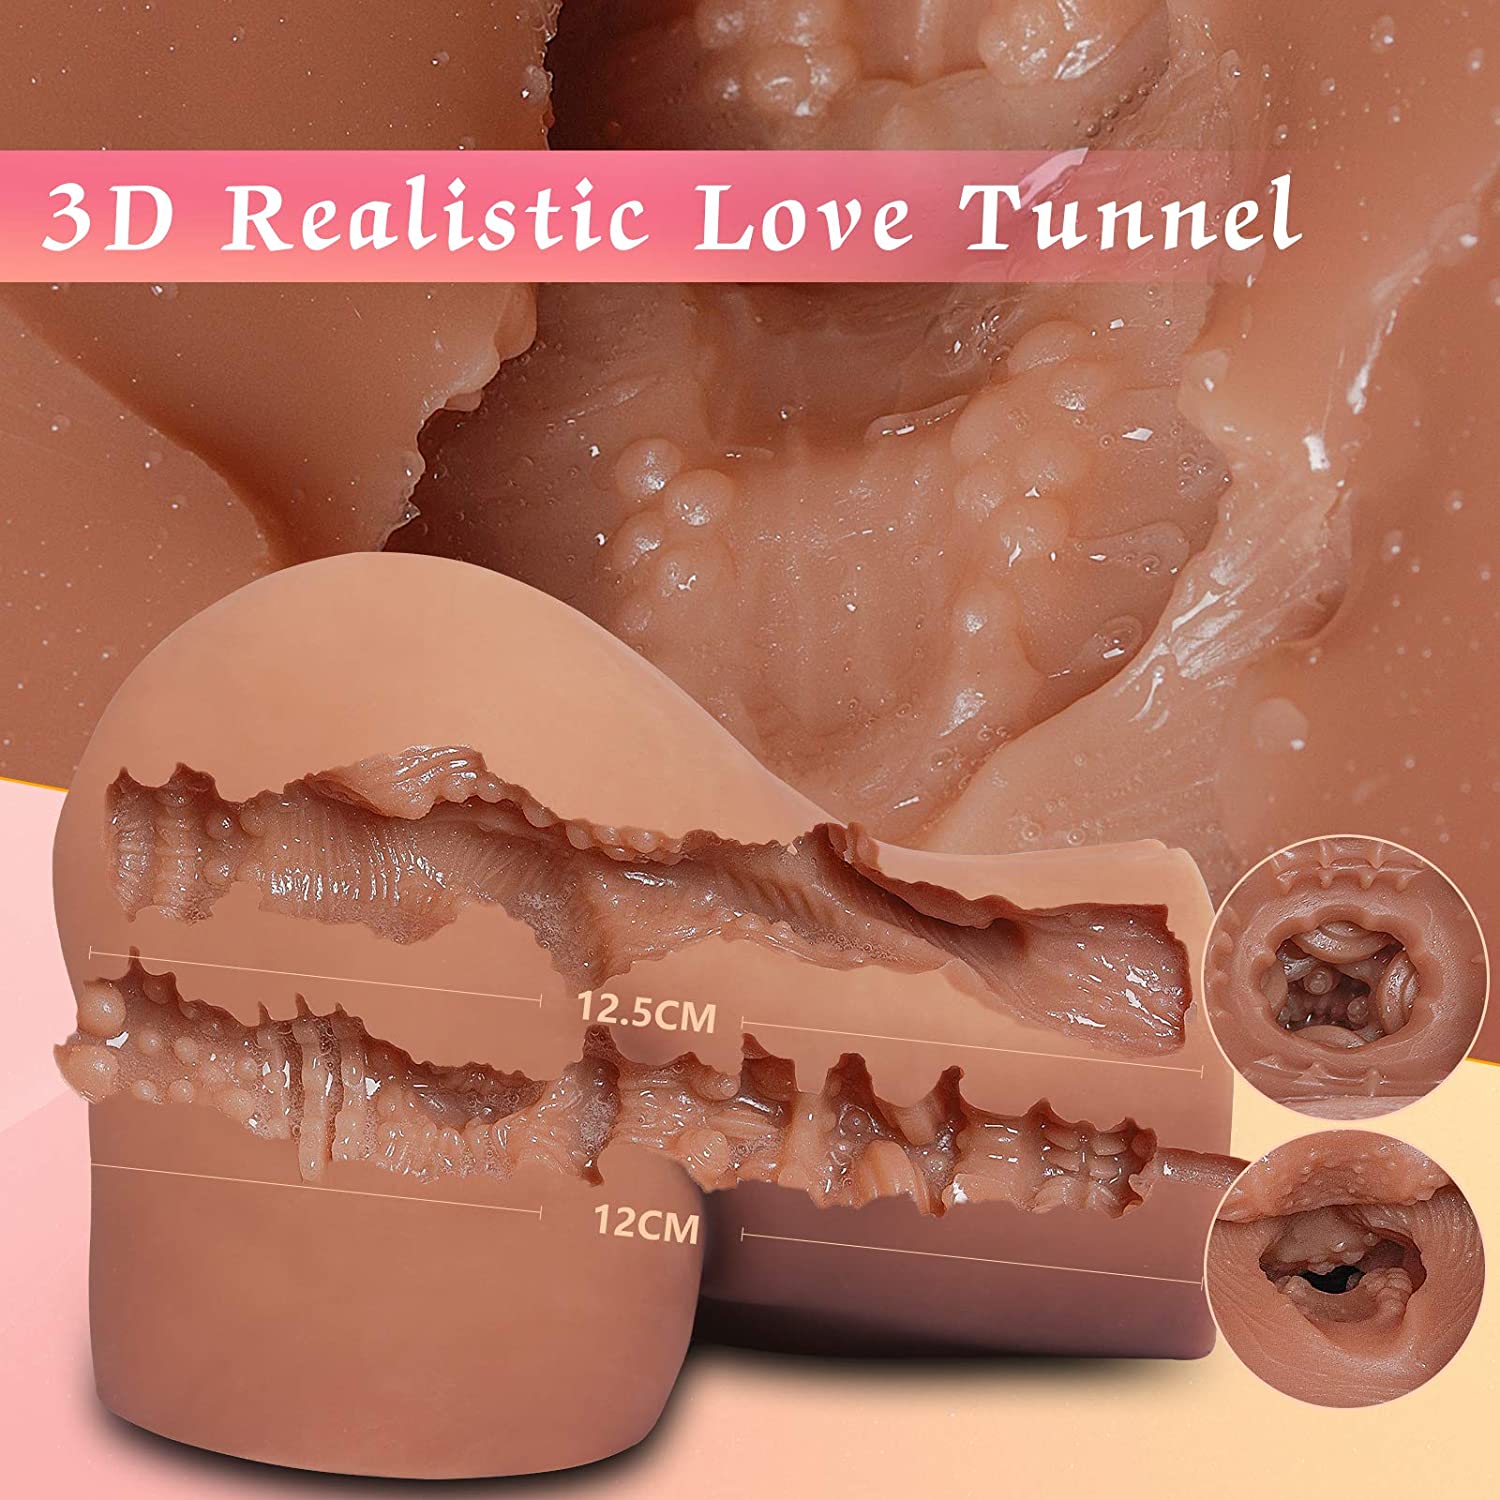 Sex Doll 3D Love Dolls with Narrow Vaginal and Anal Opening Sex Doll XXL Pussy Pussy 1: 1 Size of a Woman Realistic masturbator Erotic Sex Toys for Men 37.5 * 31.5 * 21CM Brownish